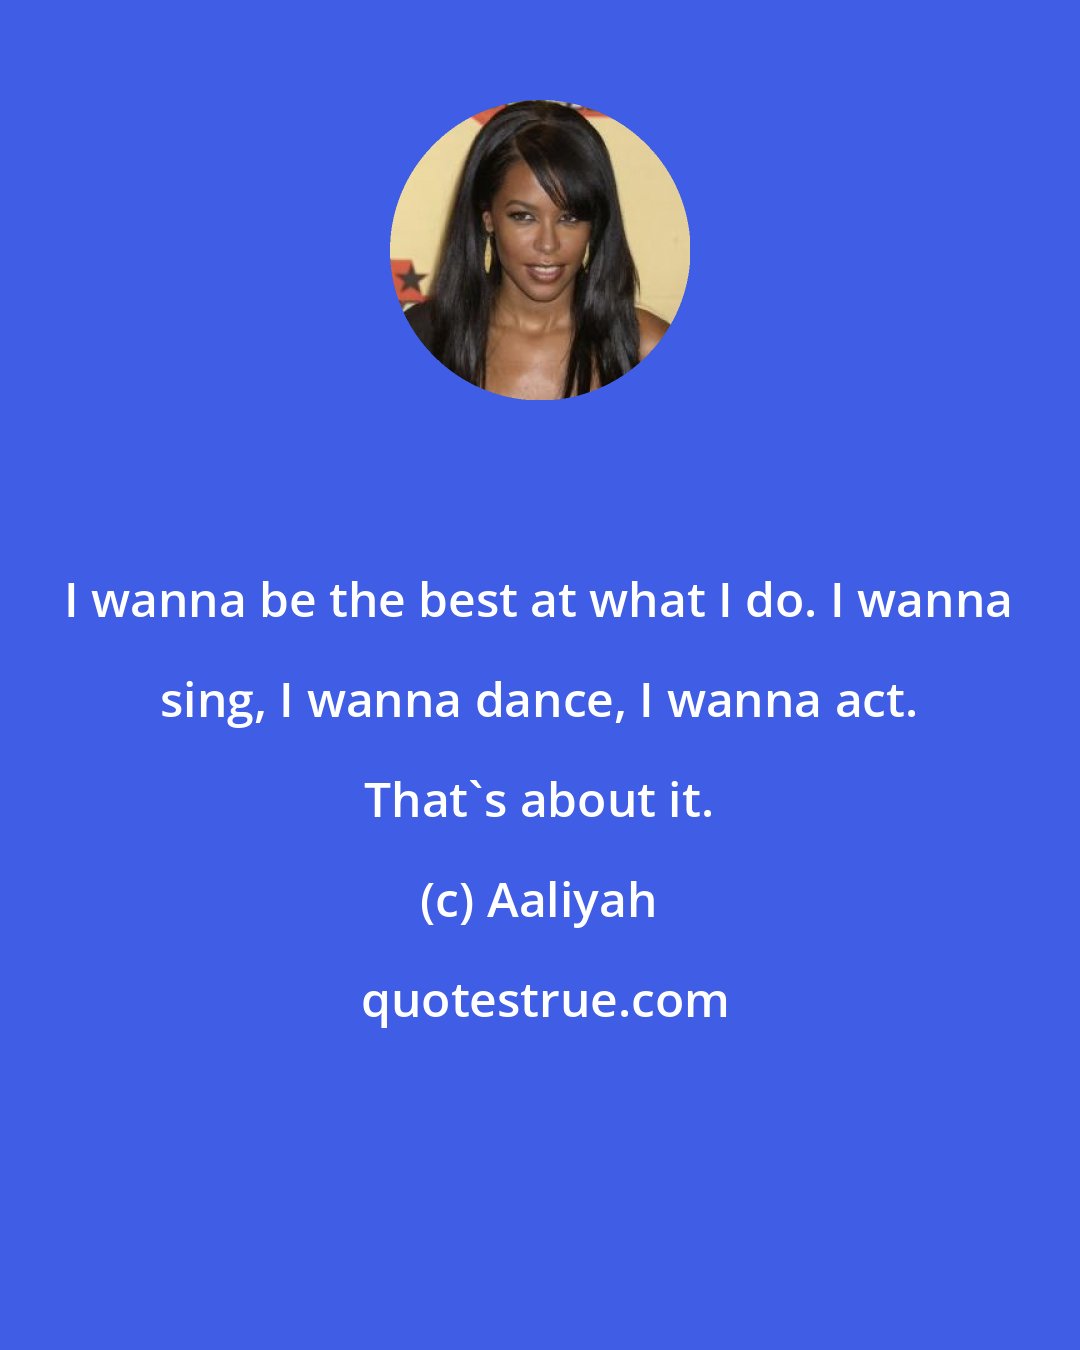 Aaliyah: I wanna be the best at what I do. I wanna sing, I wanna dance, I wanna act. That's about it.